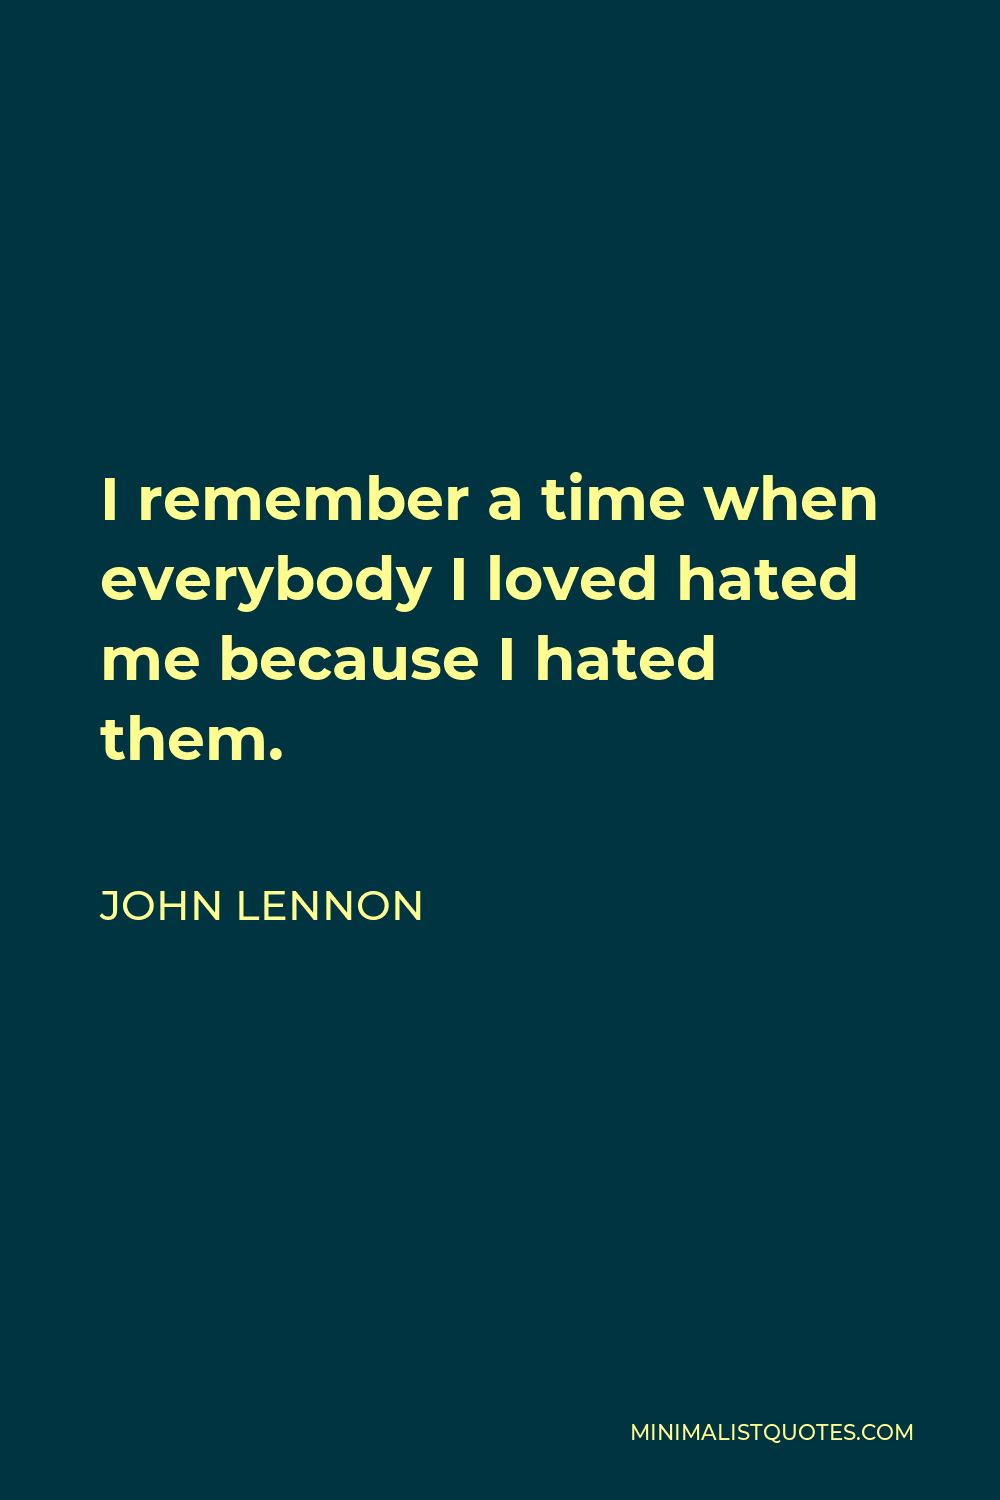 John Lennon Quote - I remember a time when everybody I loved hated me because I hated them.